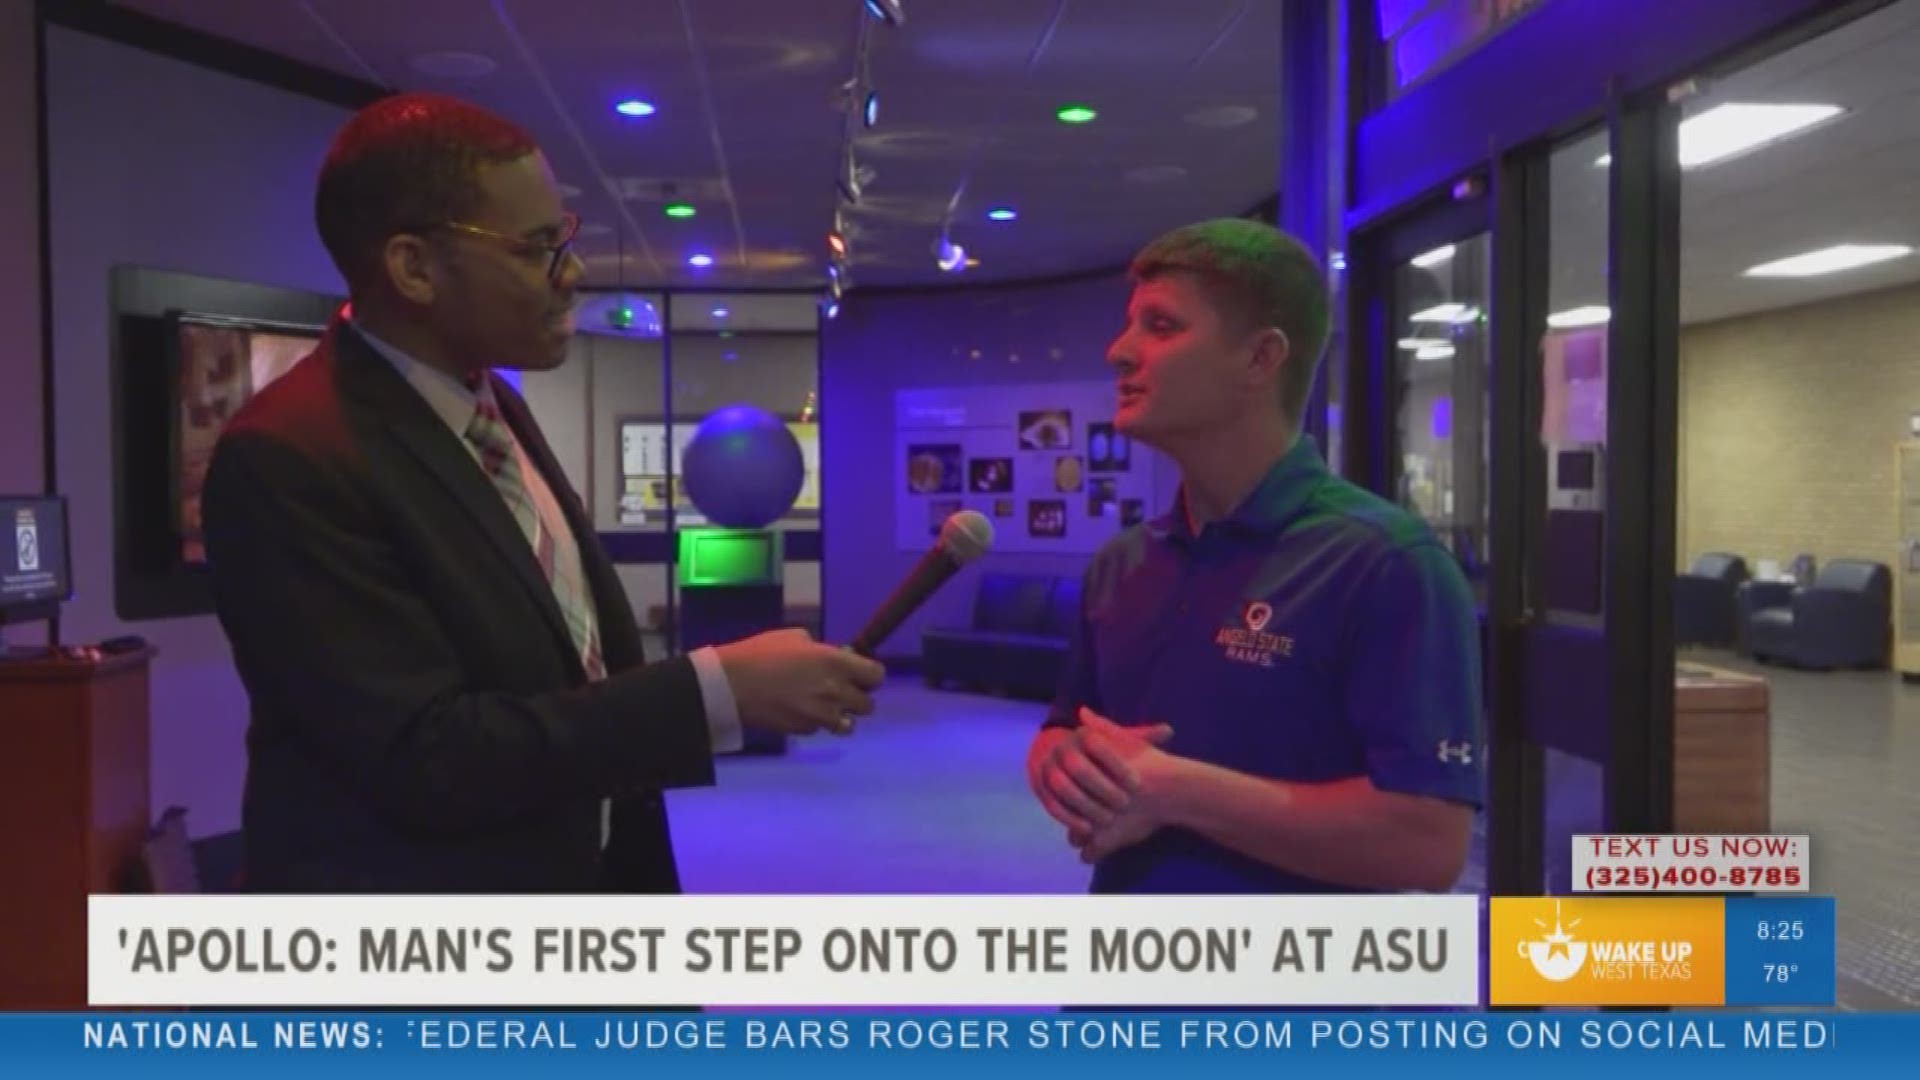 Our Malik Mingo spoke with the planetarium director at Angelo State University about the "Apollo 11: Man's First Stop Onto the Moon" astronomy show scheduled for July 16-17.